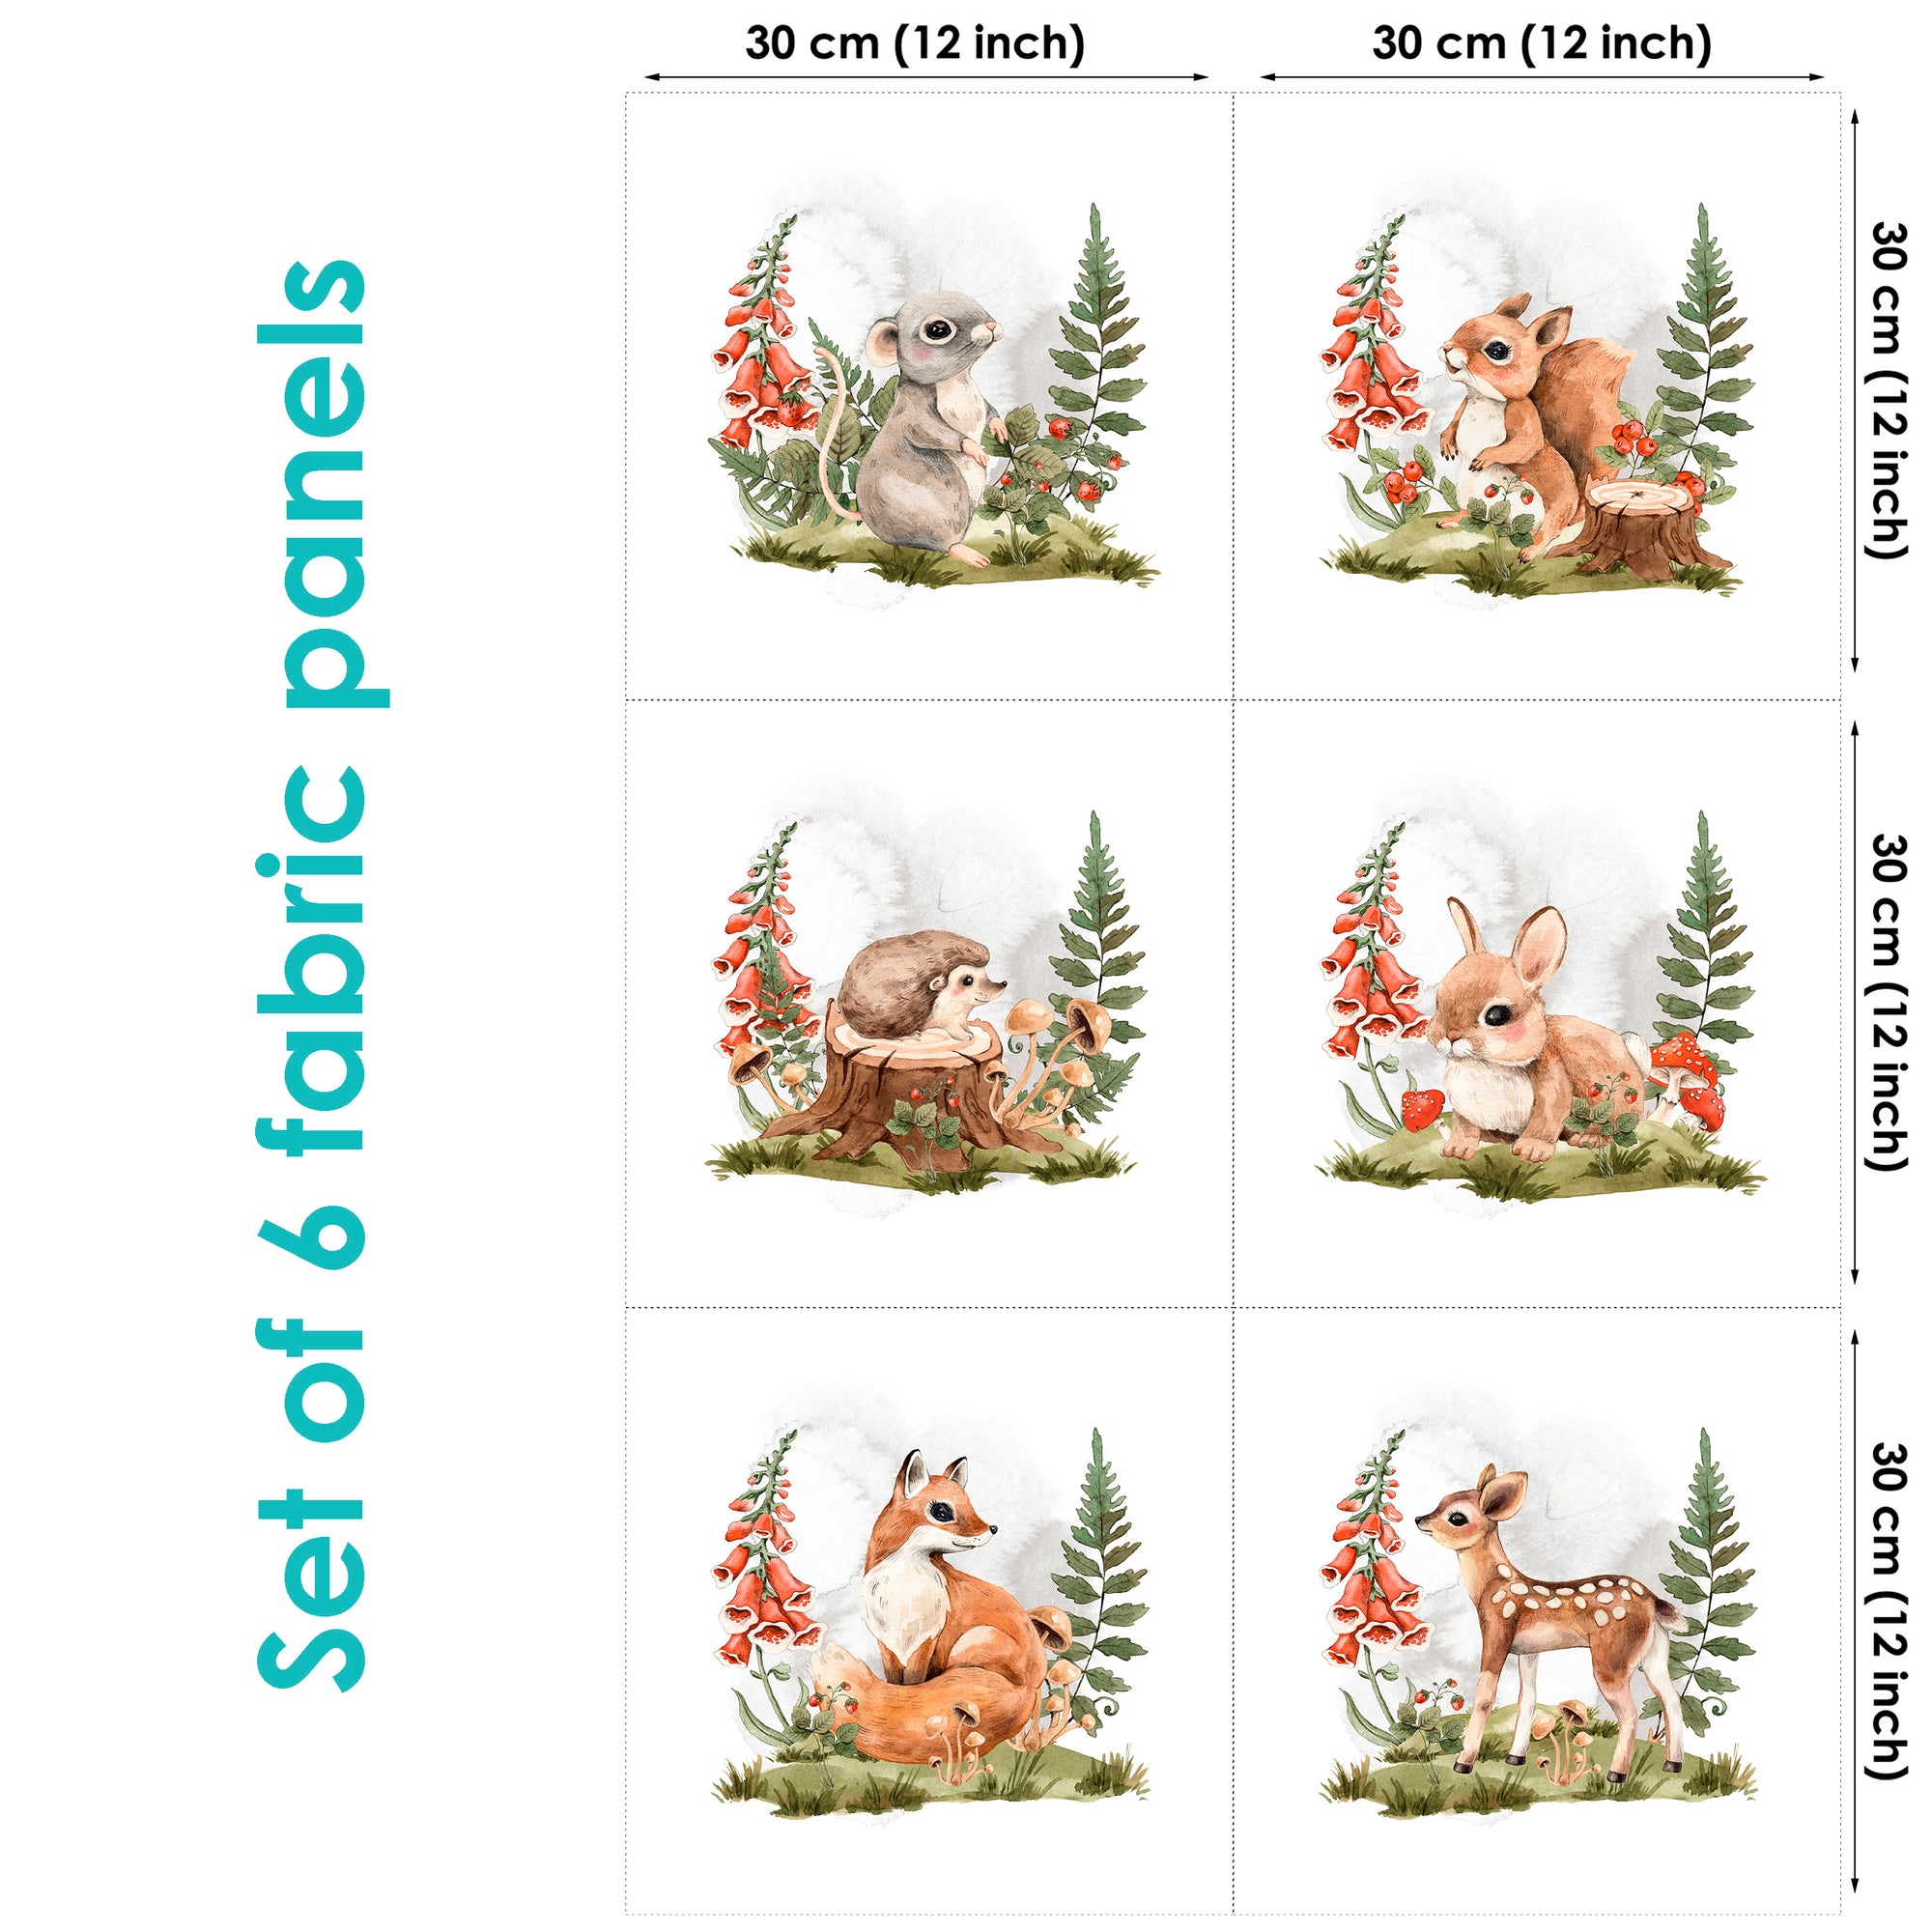 Forest Little Animals Set of 6 Fabric Panels